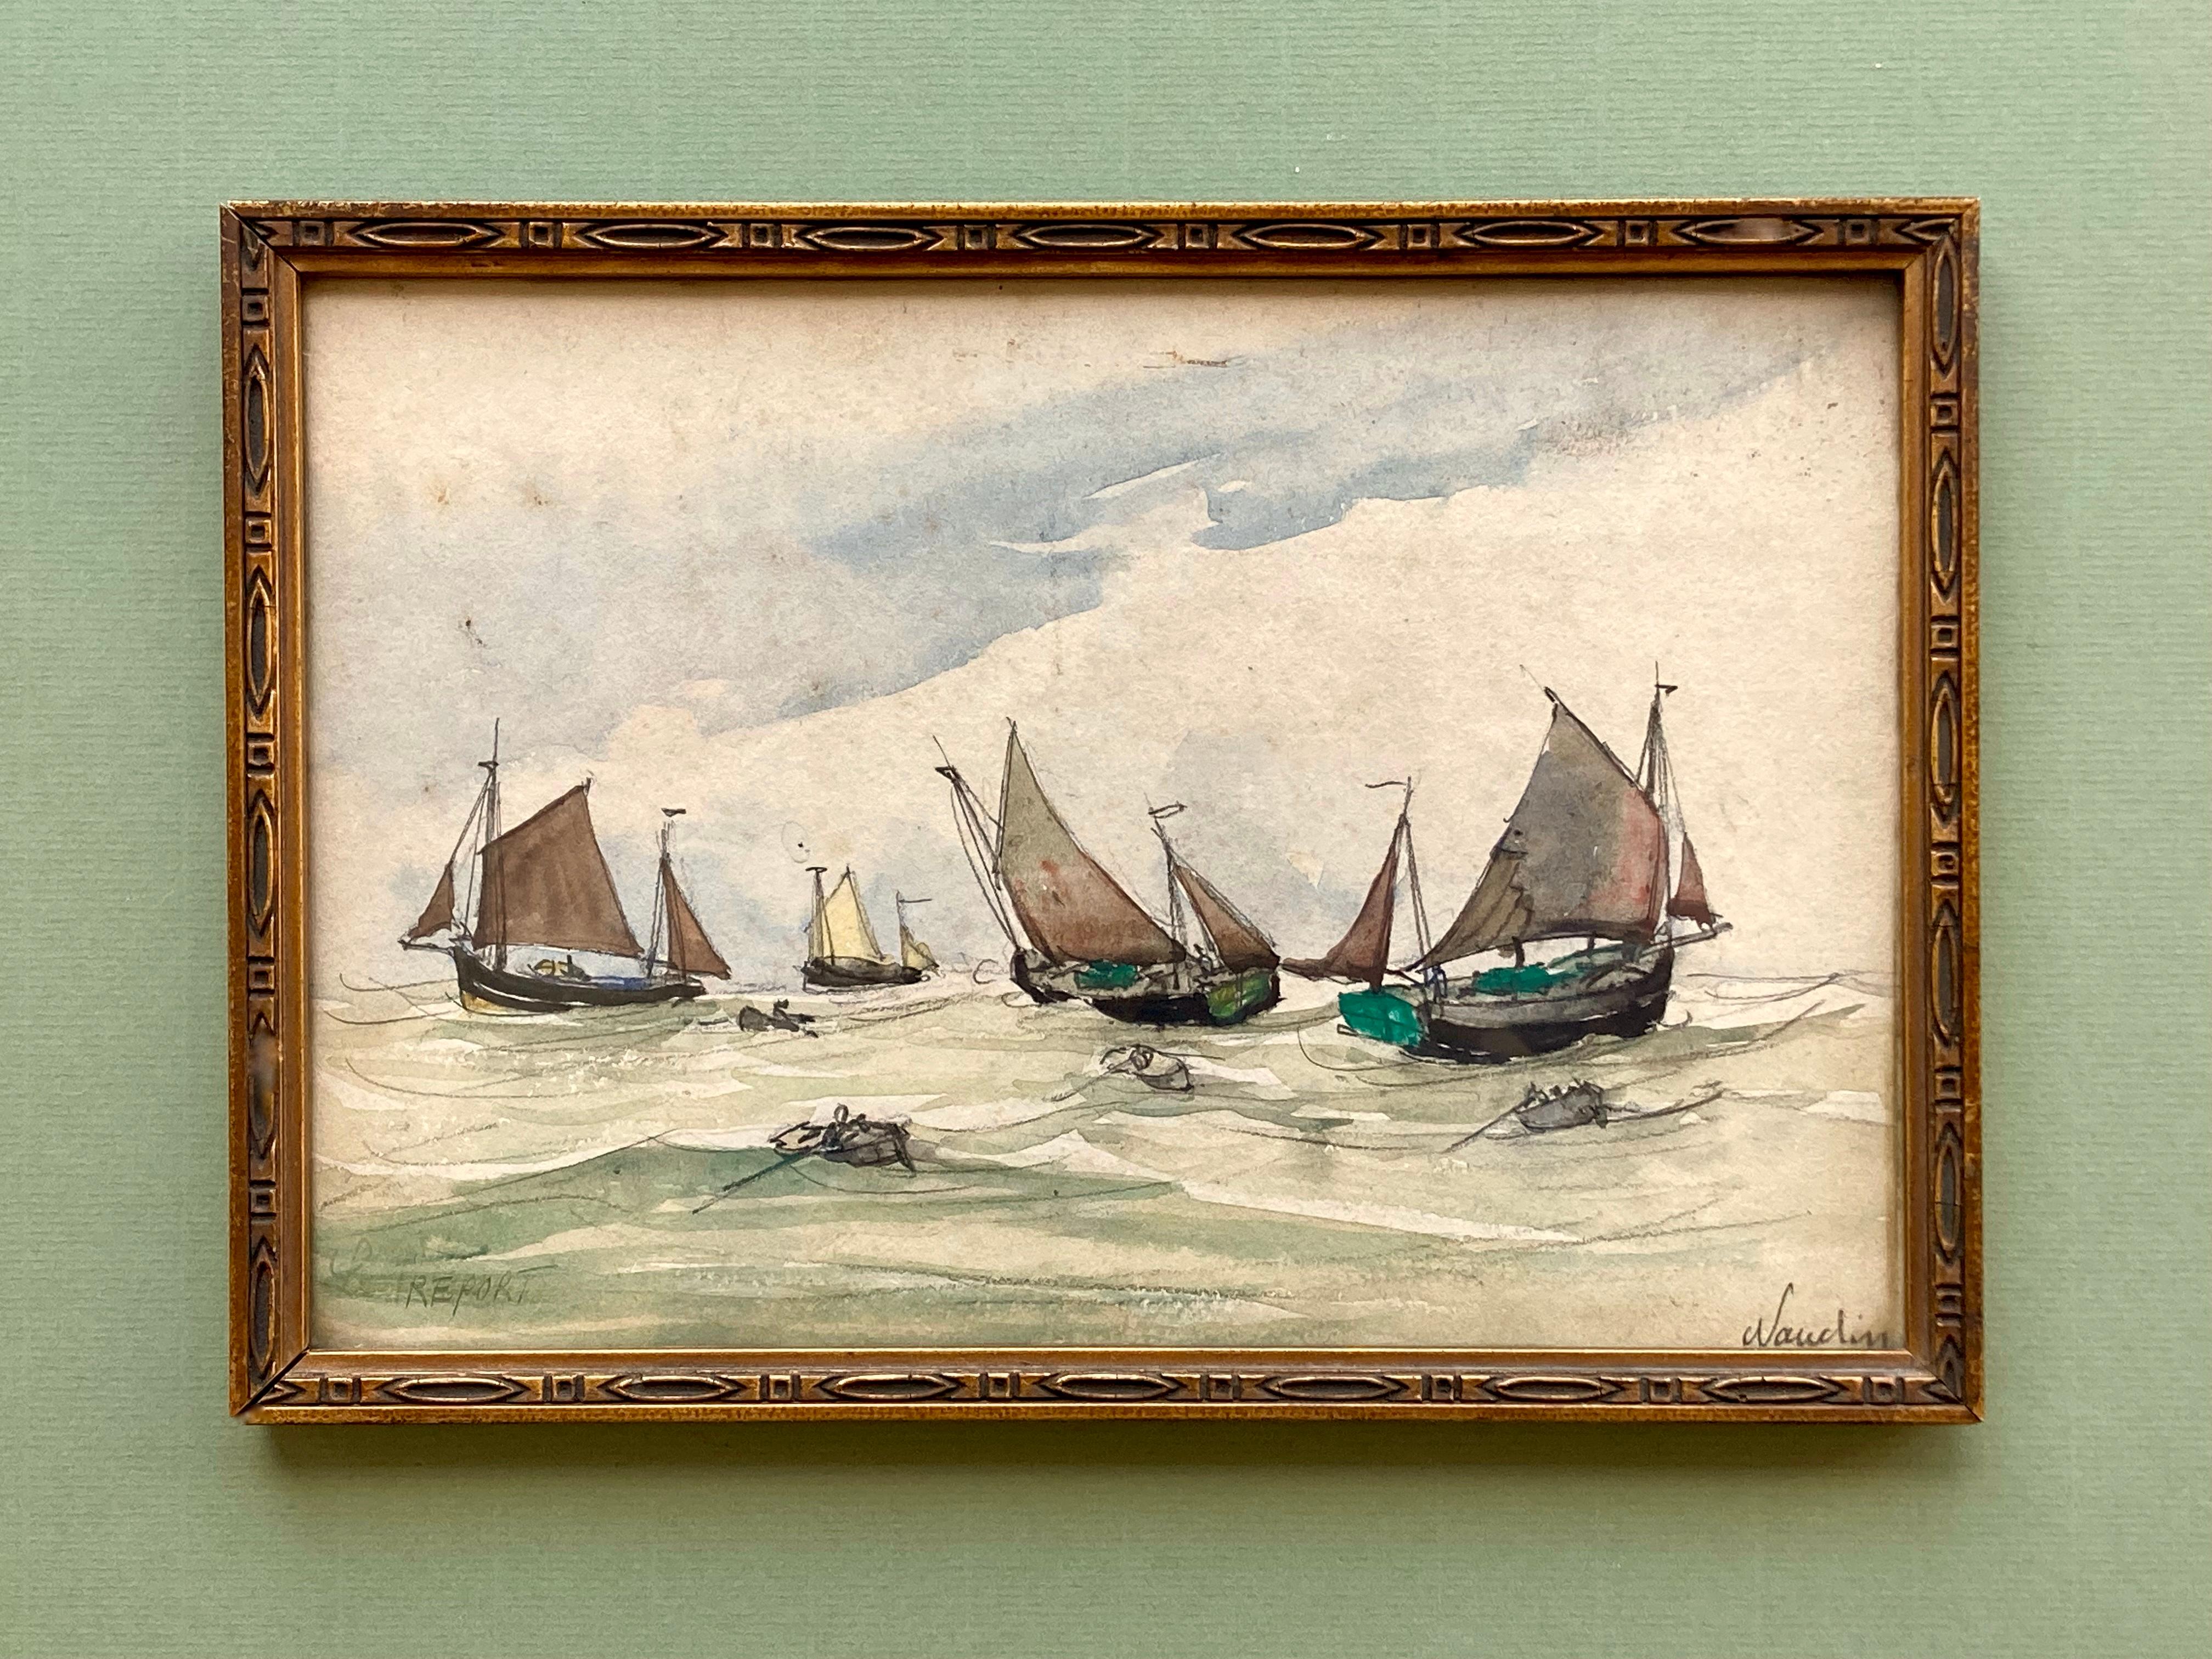 A small seascape in pencil and watercolor by the French post-impressionist painter Frank William Boggs (1900-1951). He mainly painted under the pseudonyms Frank-Will and later in life he also used Naudin. He initially studied to become an architect